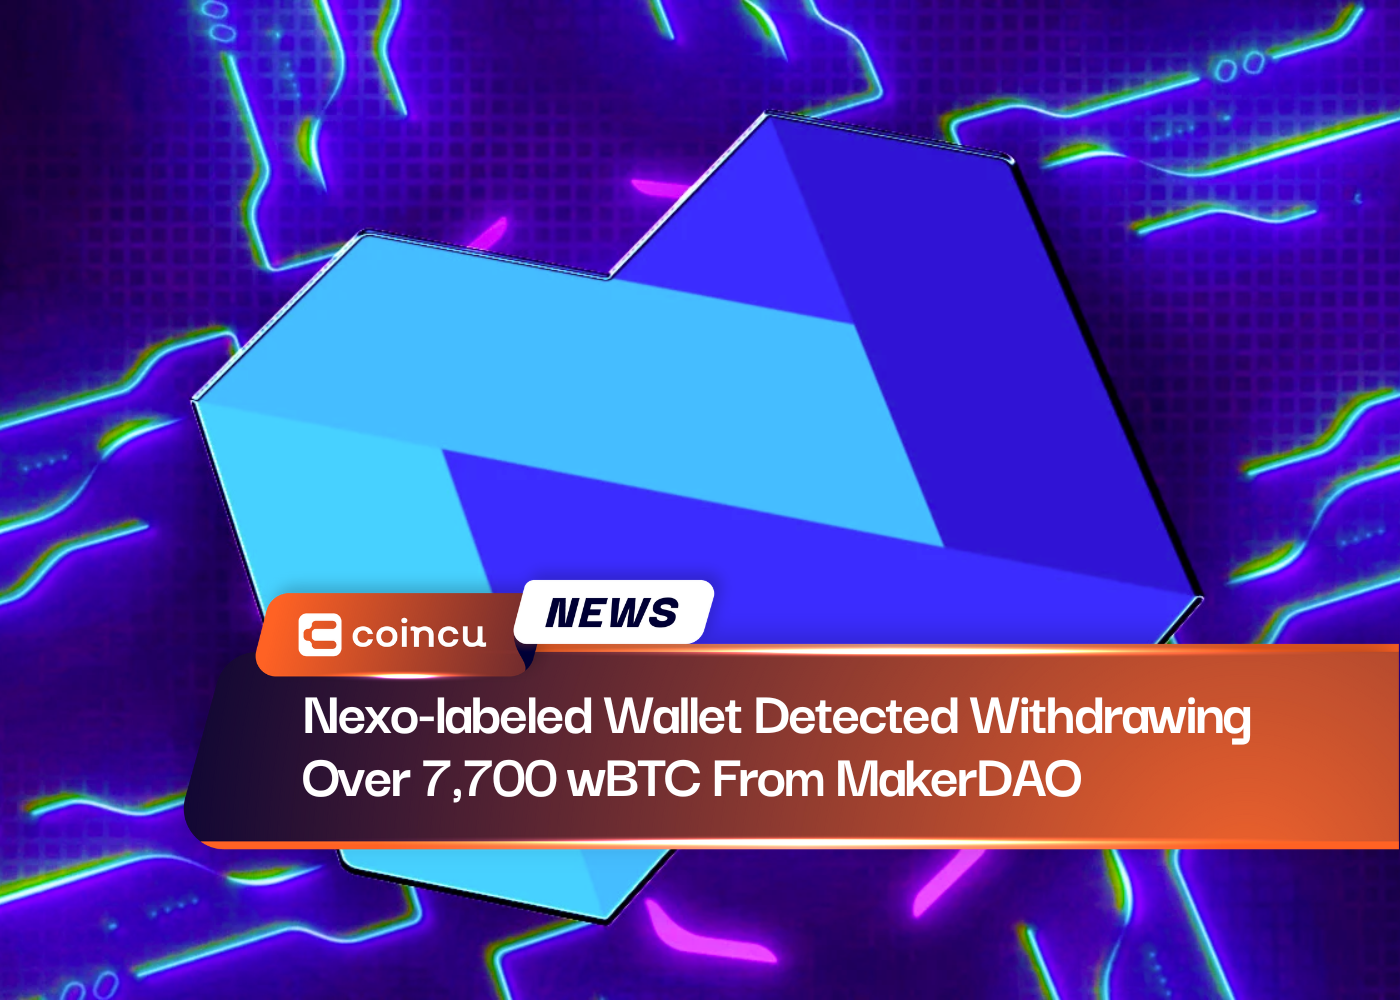 Nexo-labeled Wallet Detected Withdrawing Over 7,700 wBTC from MakerDAO